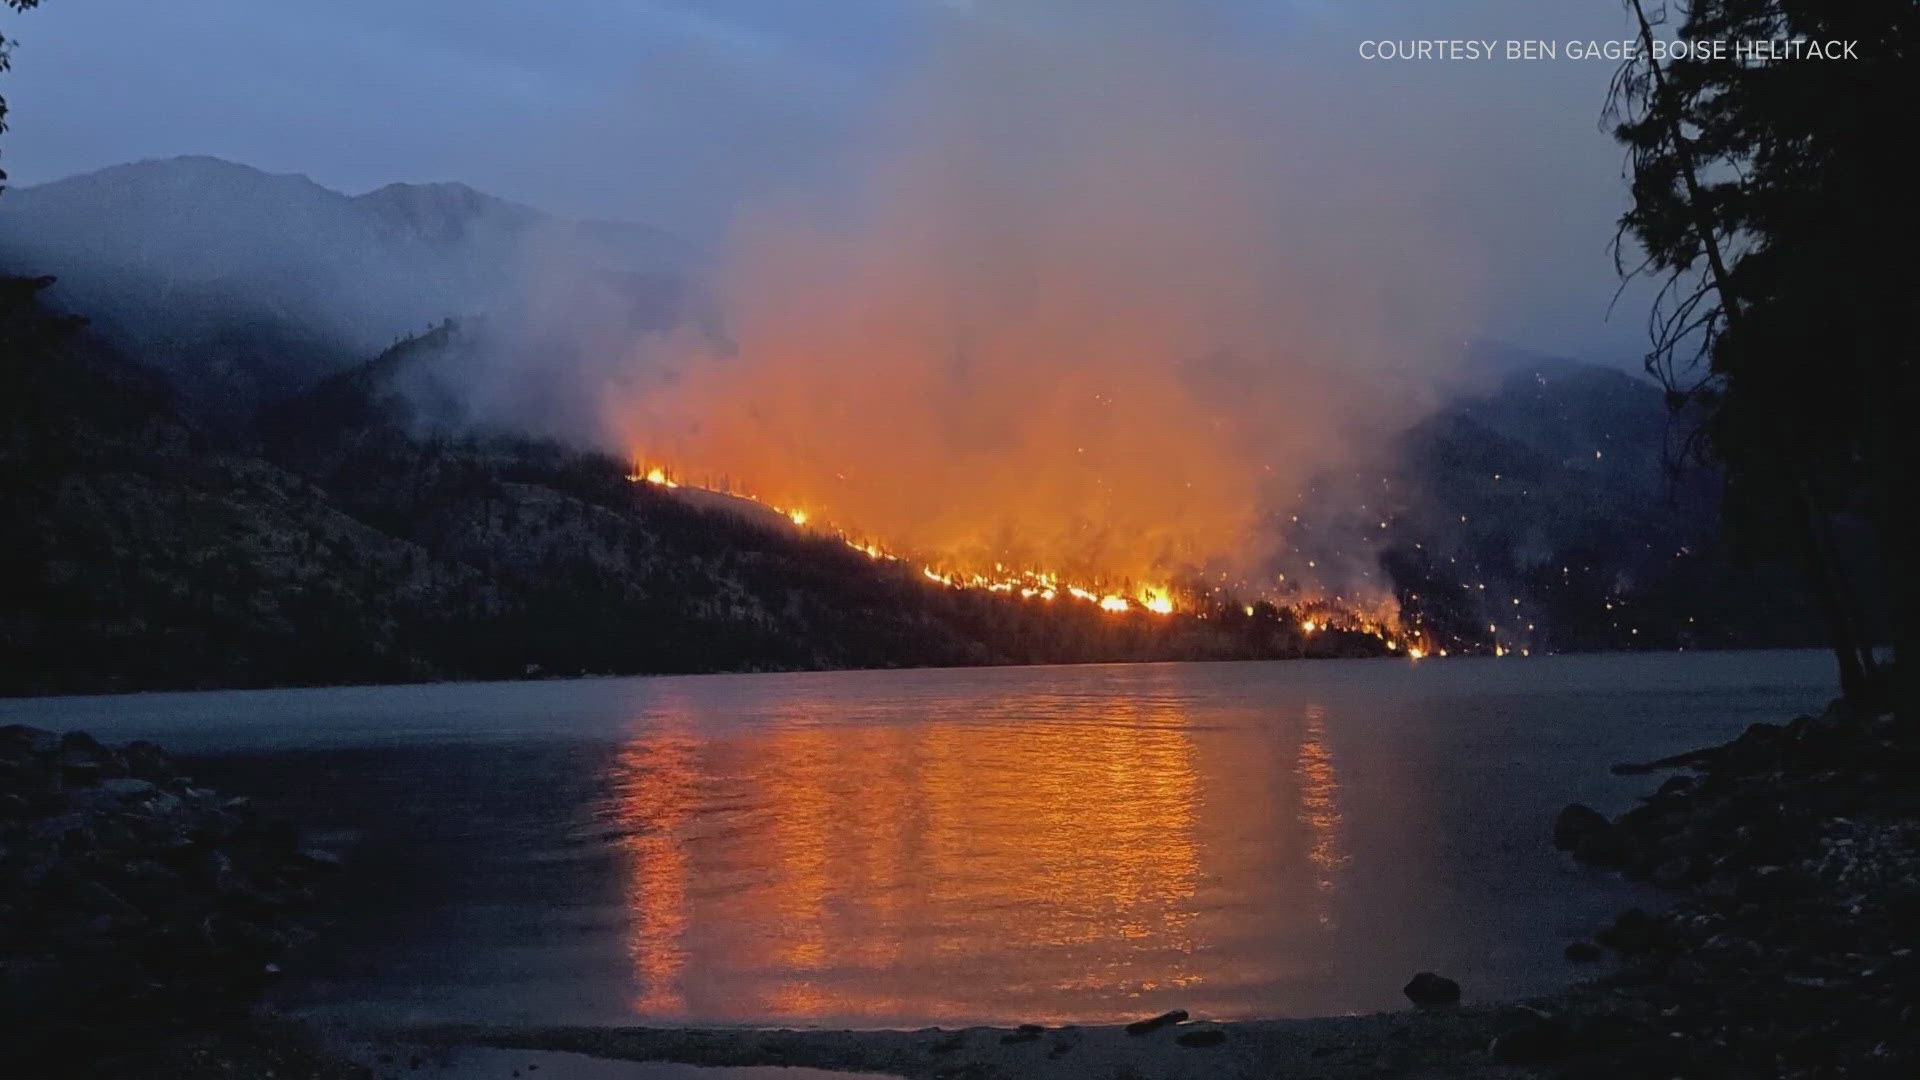 Level 3 evacuations have been extended as the Pioneer Fire near Lake Chelan burns over 7,000 acres.